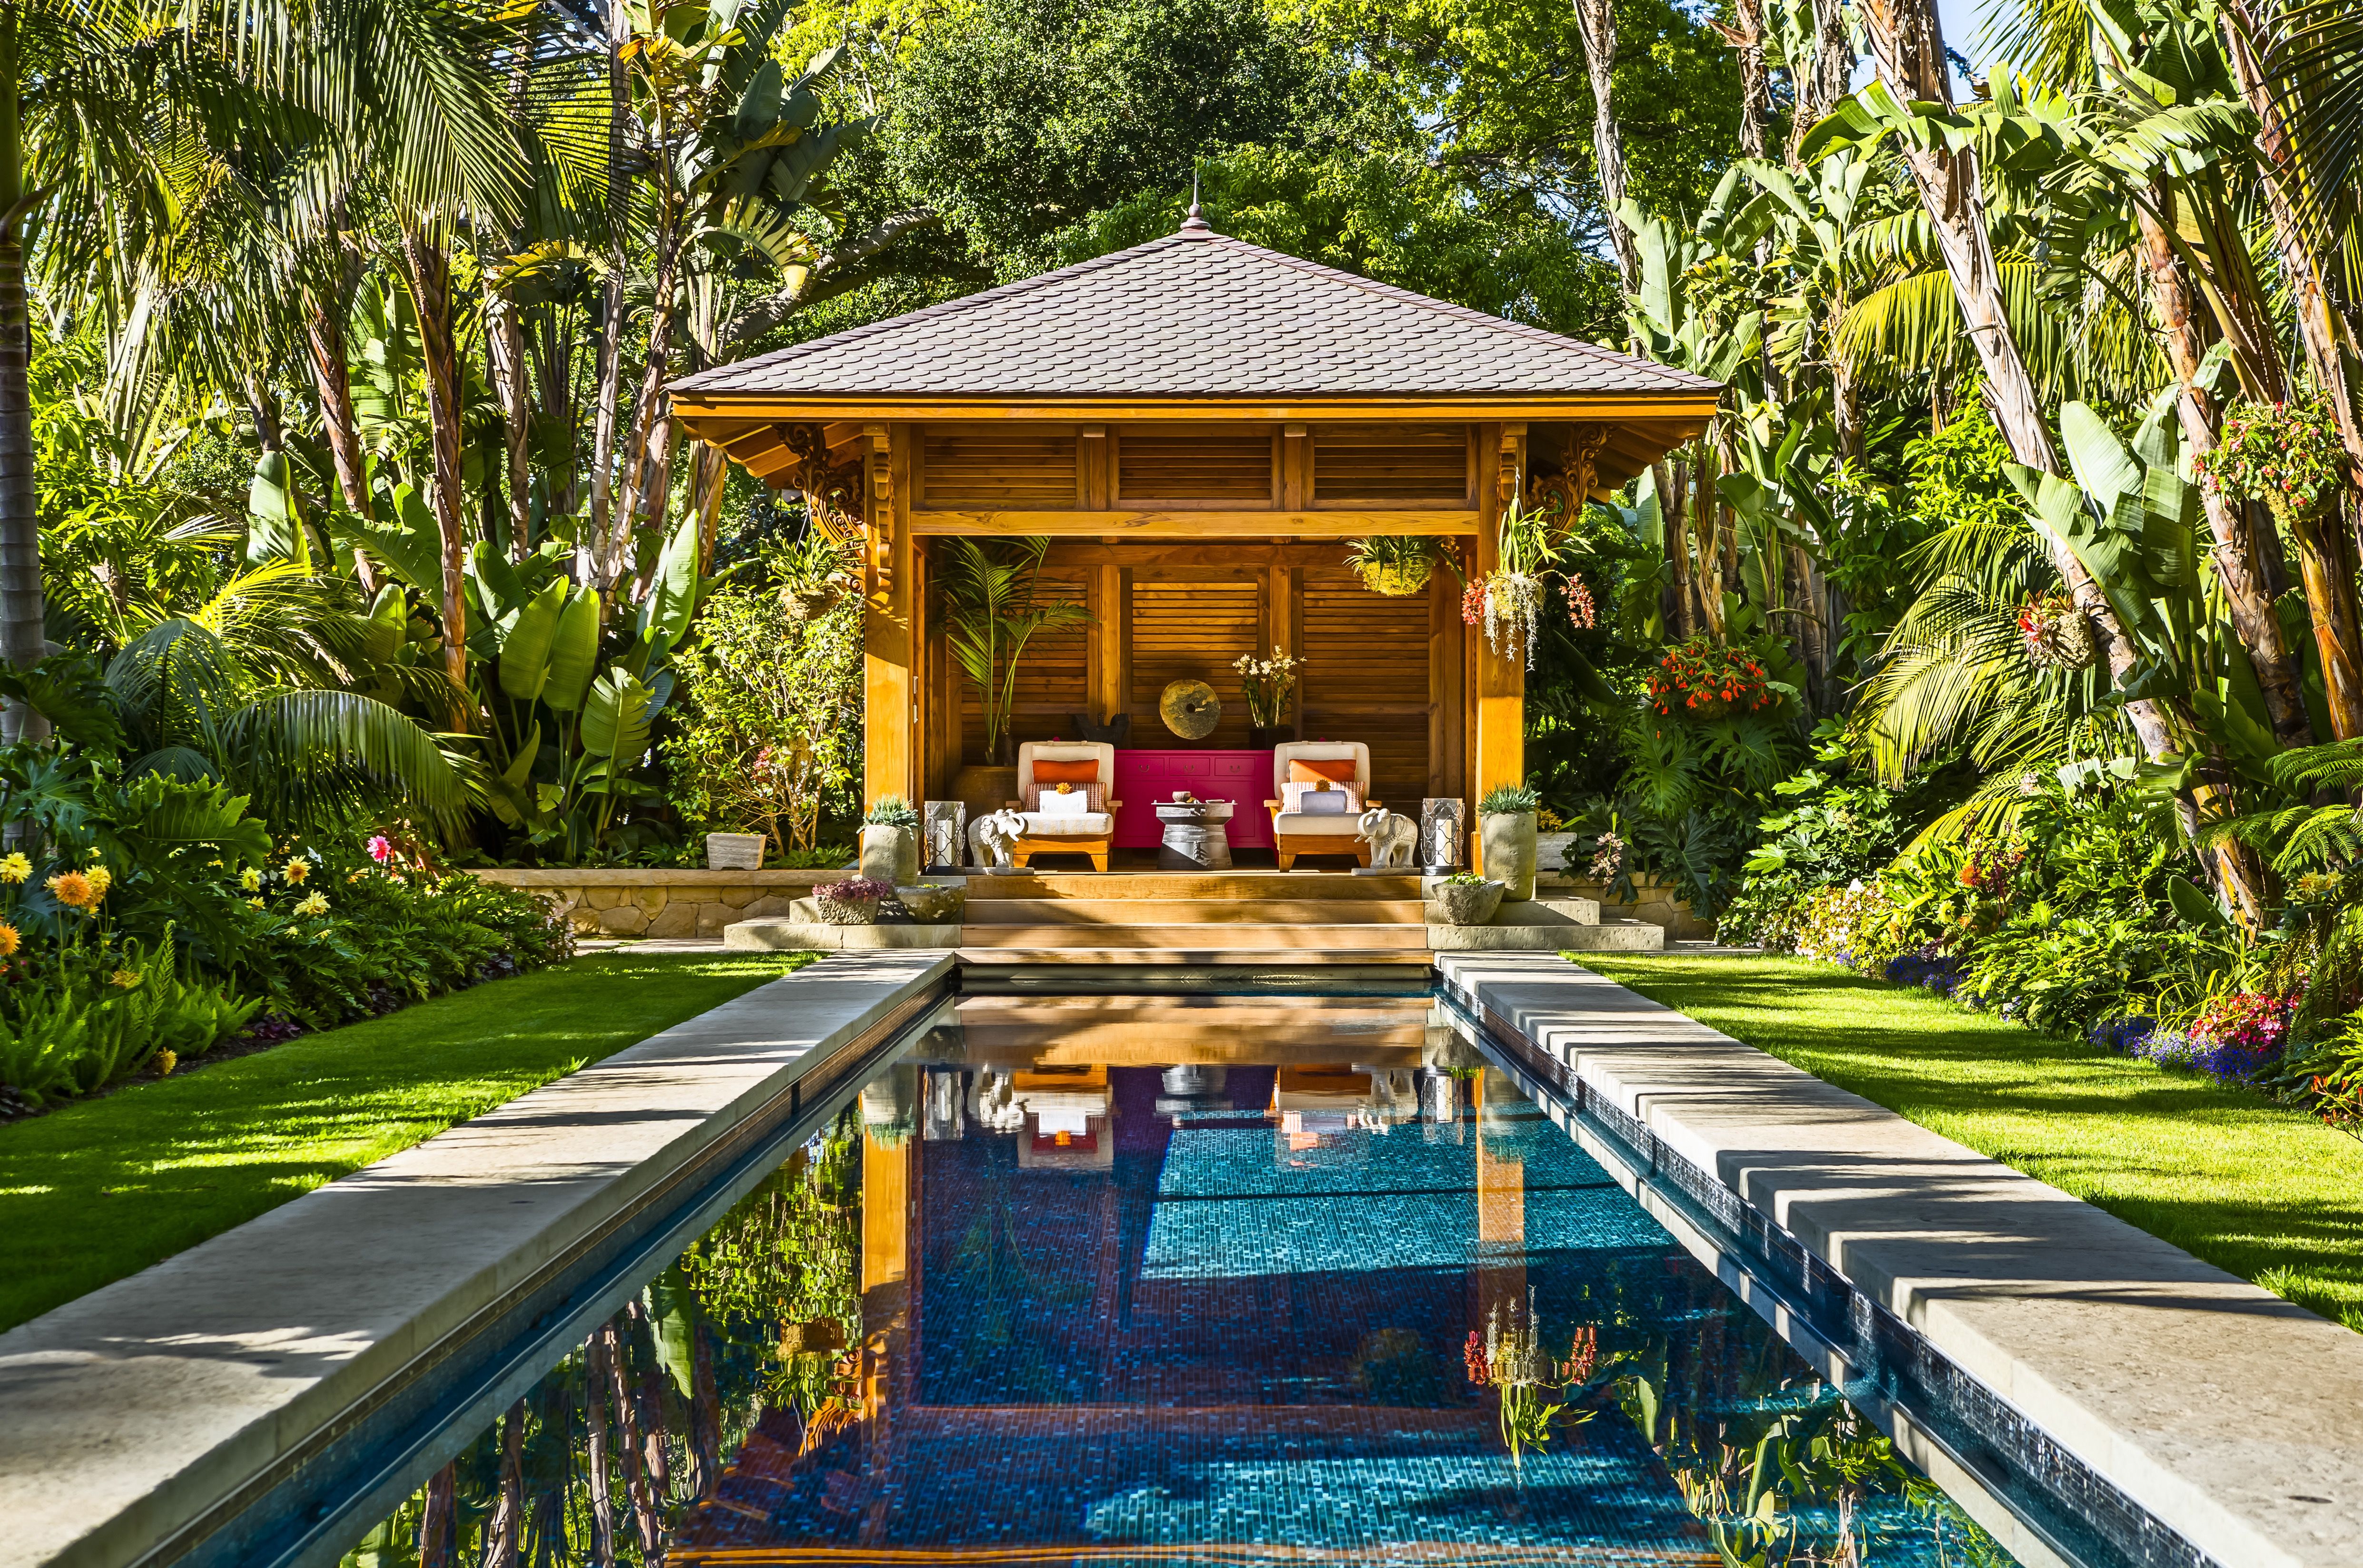 Contemporary Tropical Garden Folly With Cushioned Seating And Lap Pool (View 9 of 26)